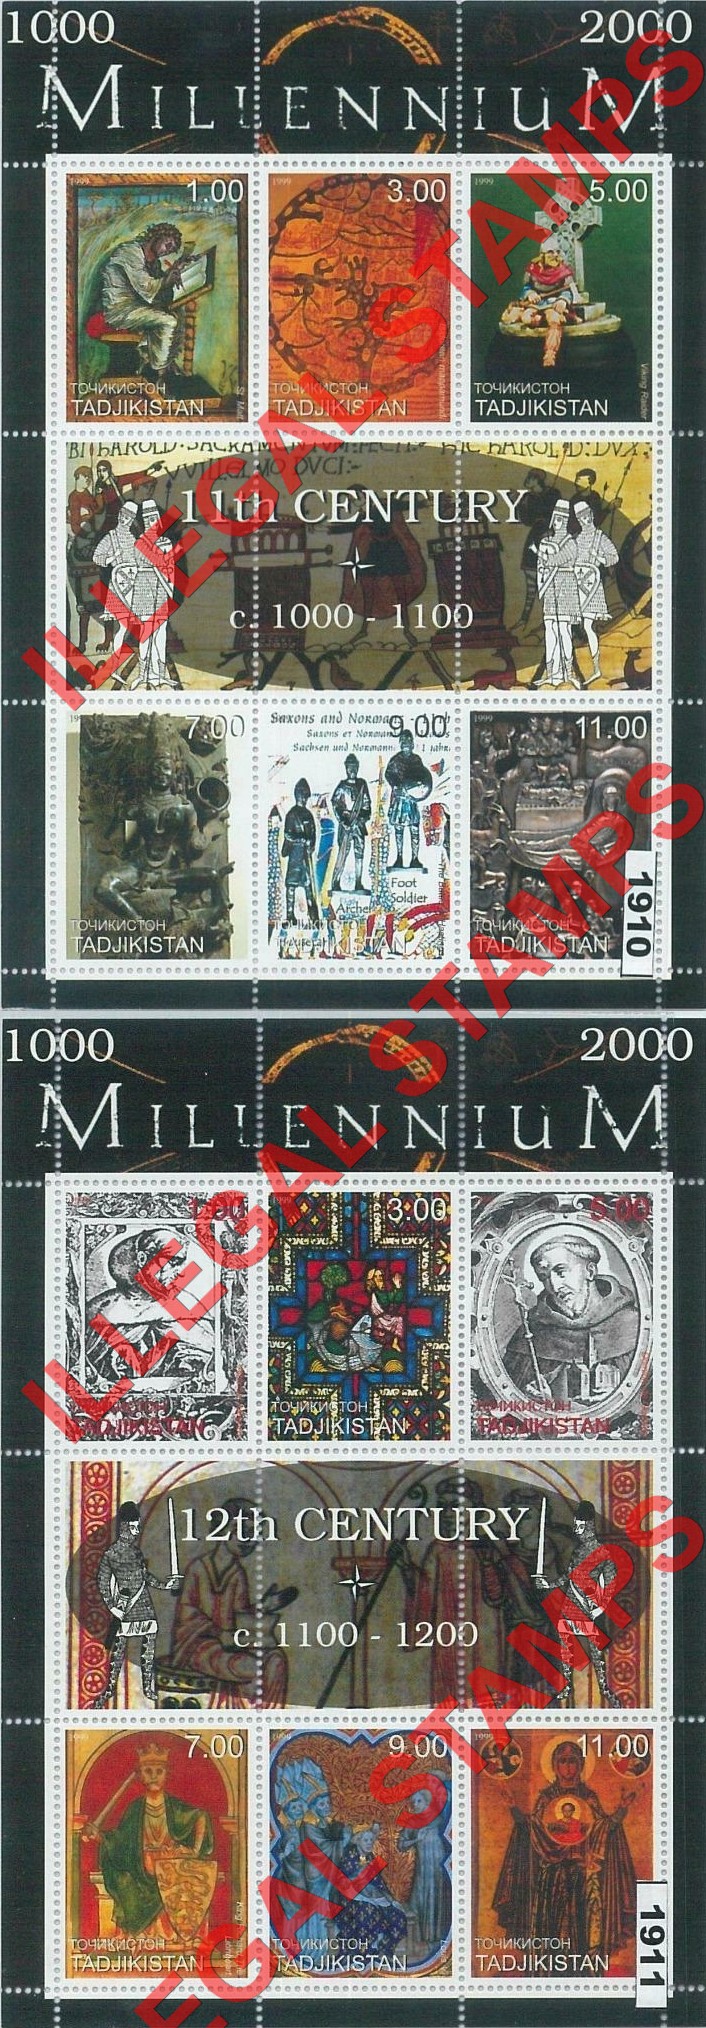 Tajikistan 1999 Millennium 11th and 12th Century Illegal Stamp Souvenir Sheets of 9